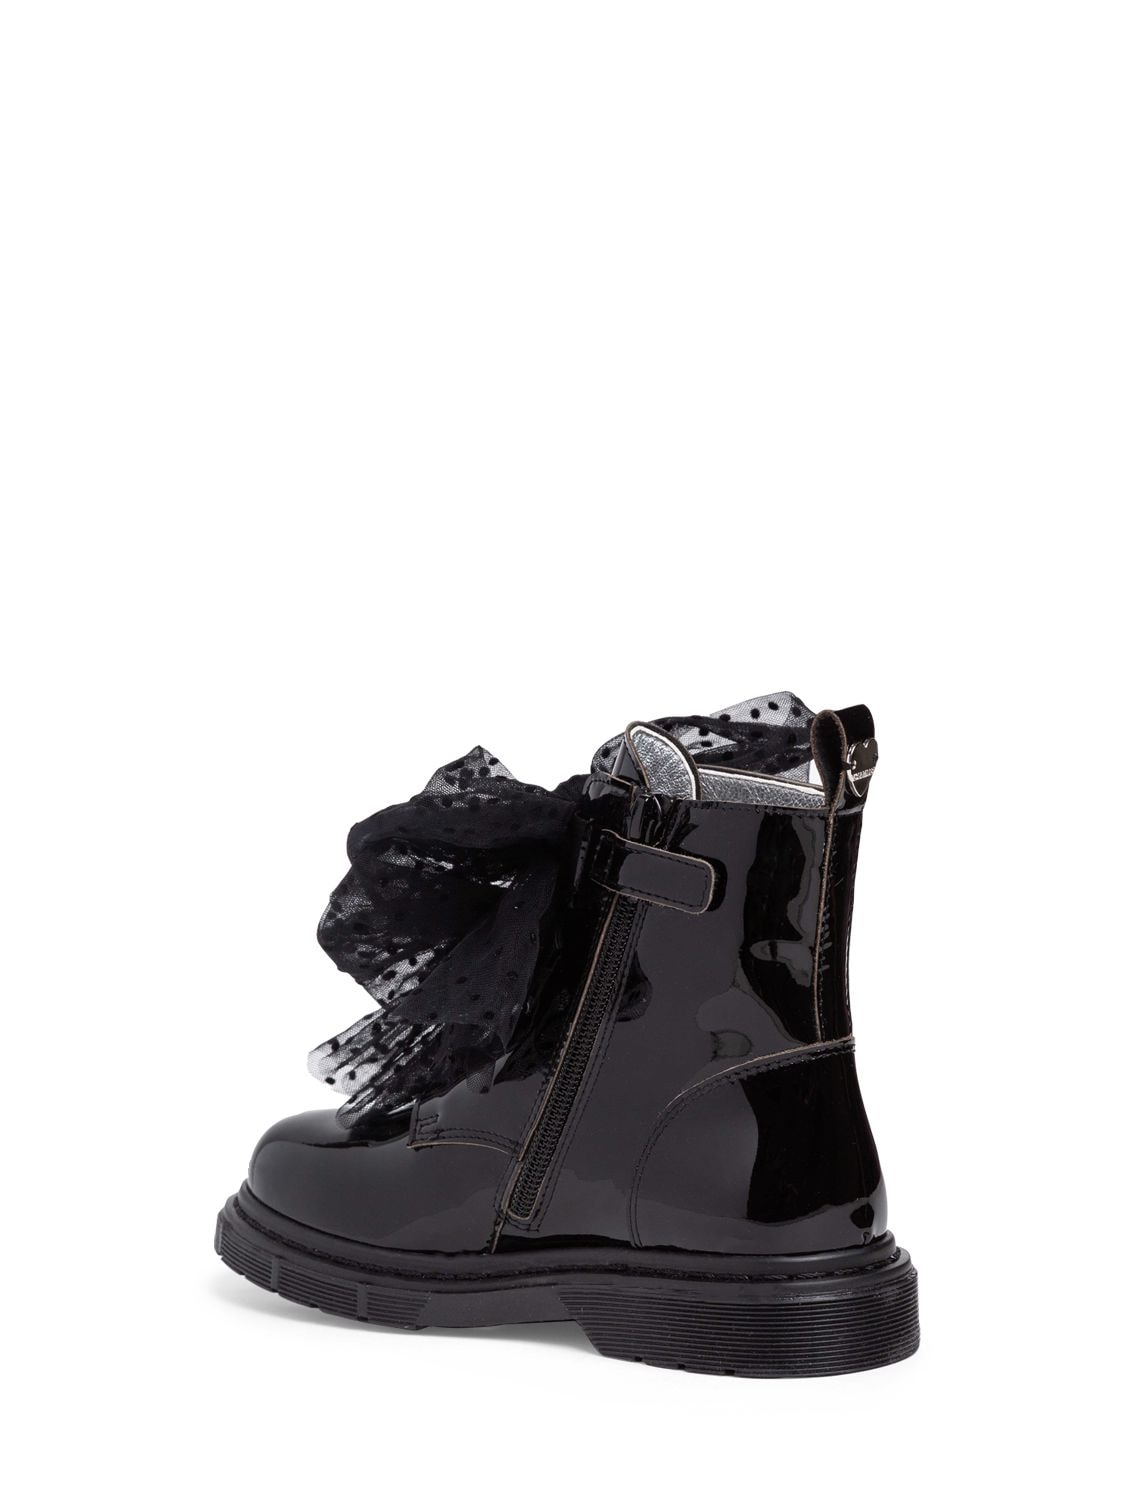 Shop Monnalisa Patent Leather Boots W/ Tulle Bow In Black